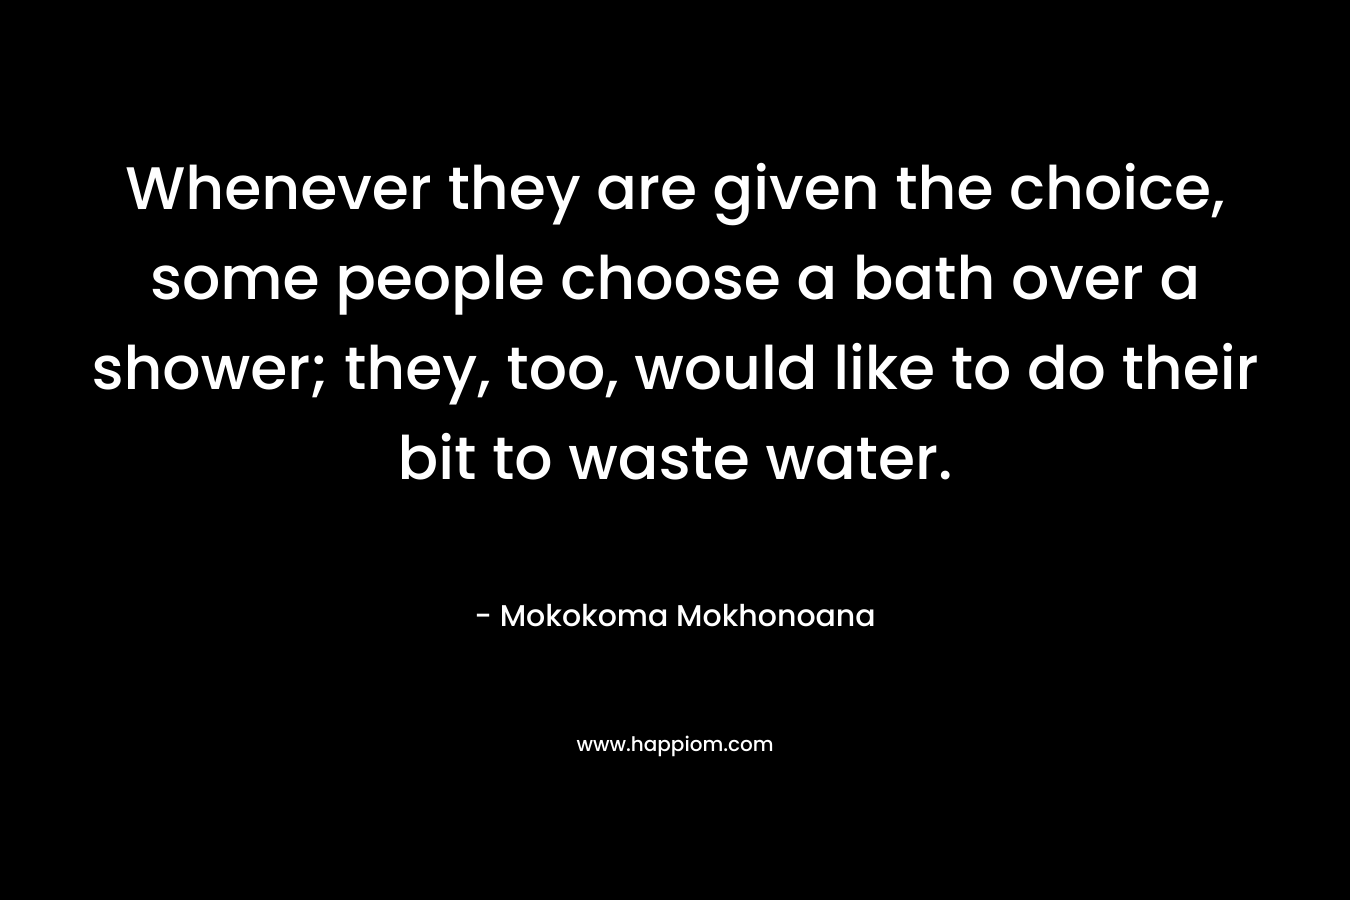 Whenever they are given the choice, some people choose a bath over a shower; they, too, would like to do their bit to waste water. – Mokokoma Mokhonoana